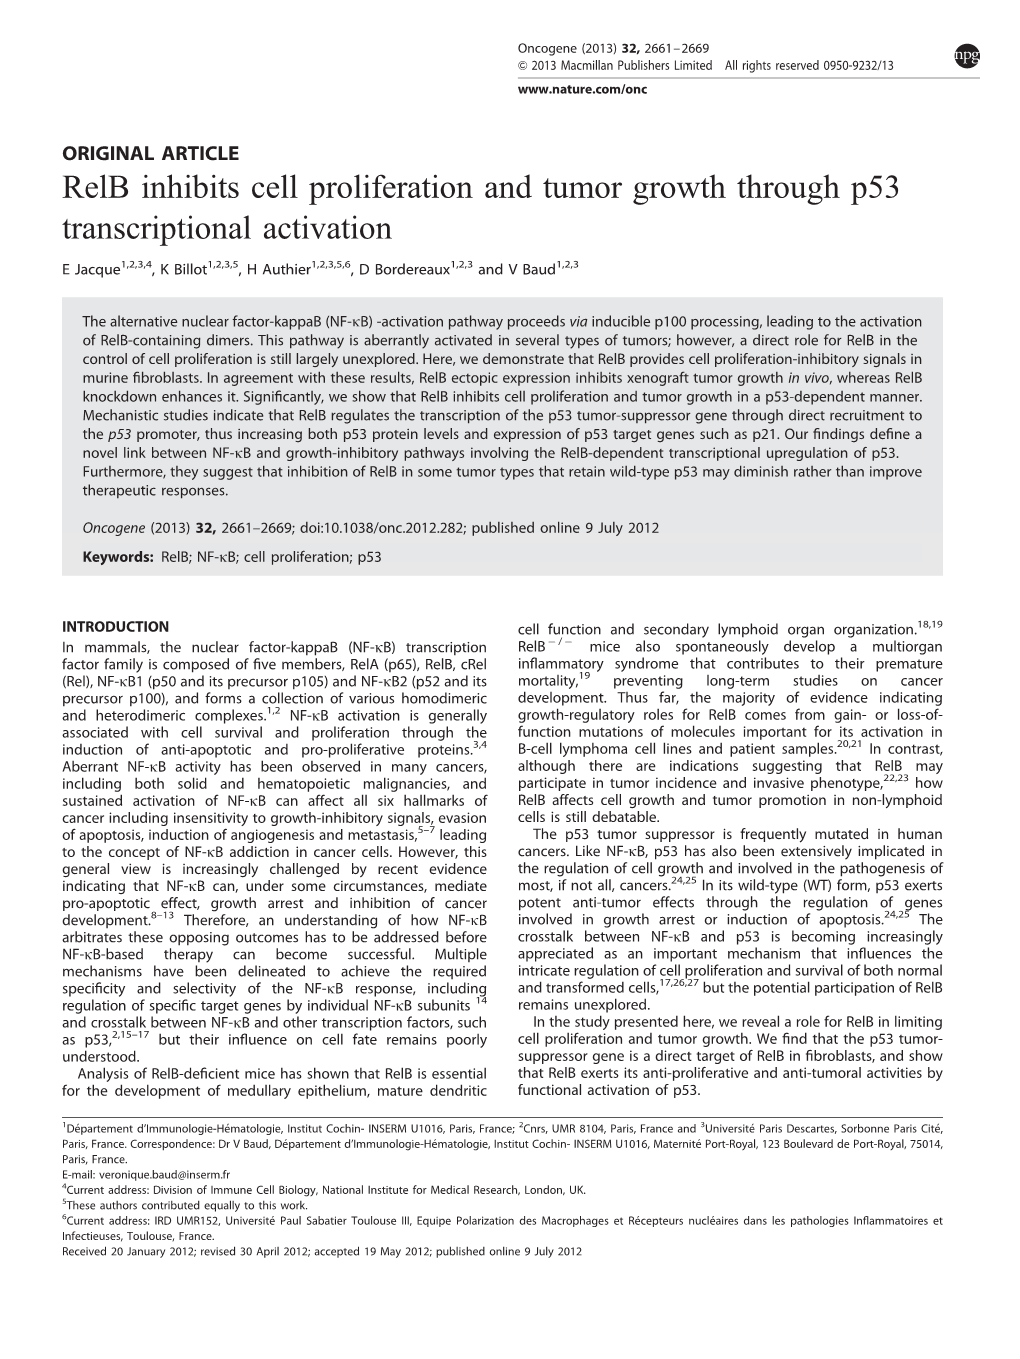 Relb Inhibits Cell Proliferation and Tumor Growth Through P53 Transcriptional Activation